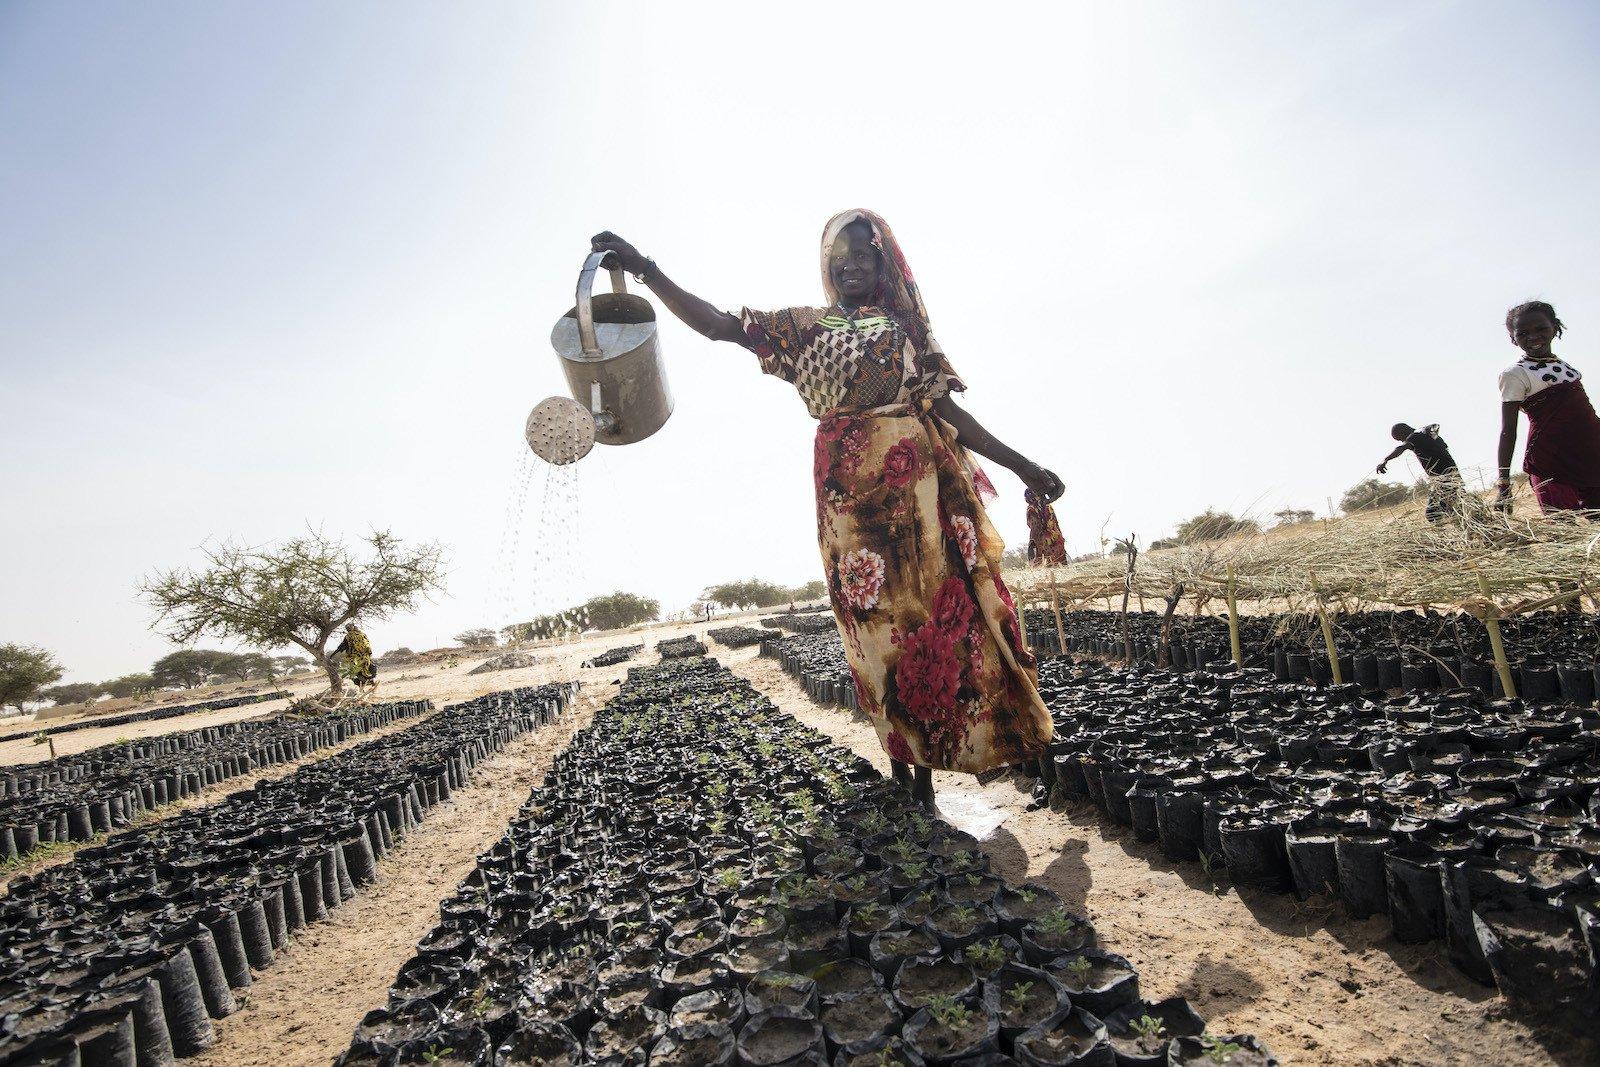 A woman holds a watering can aloft, sprinkling water on seedlings arranged in rows on the dried bed of Lake Chad, Chad